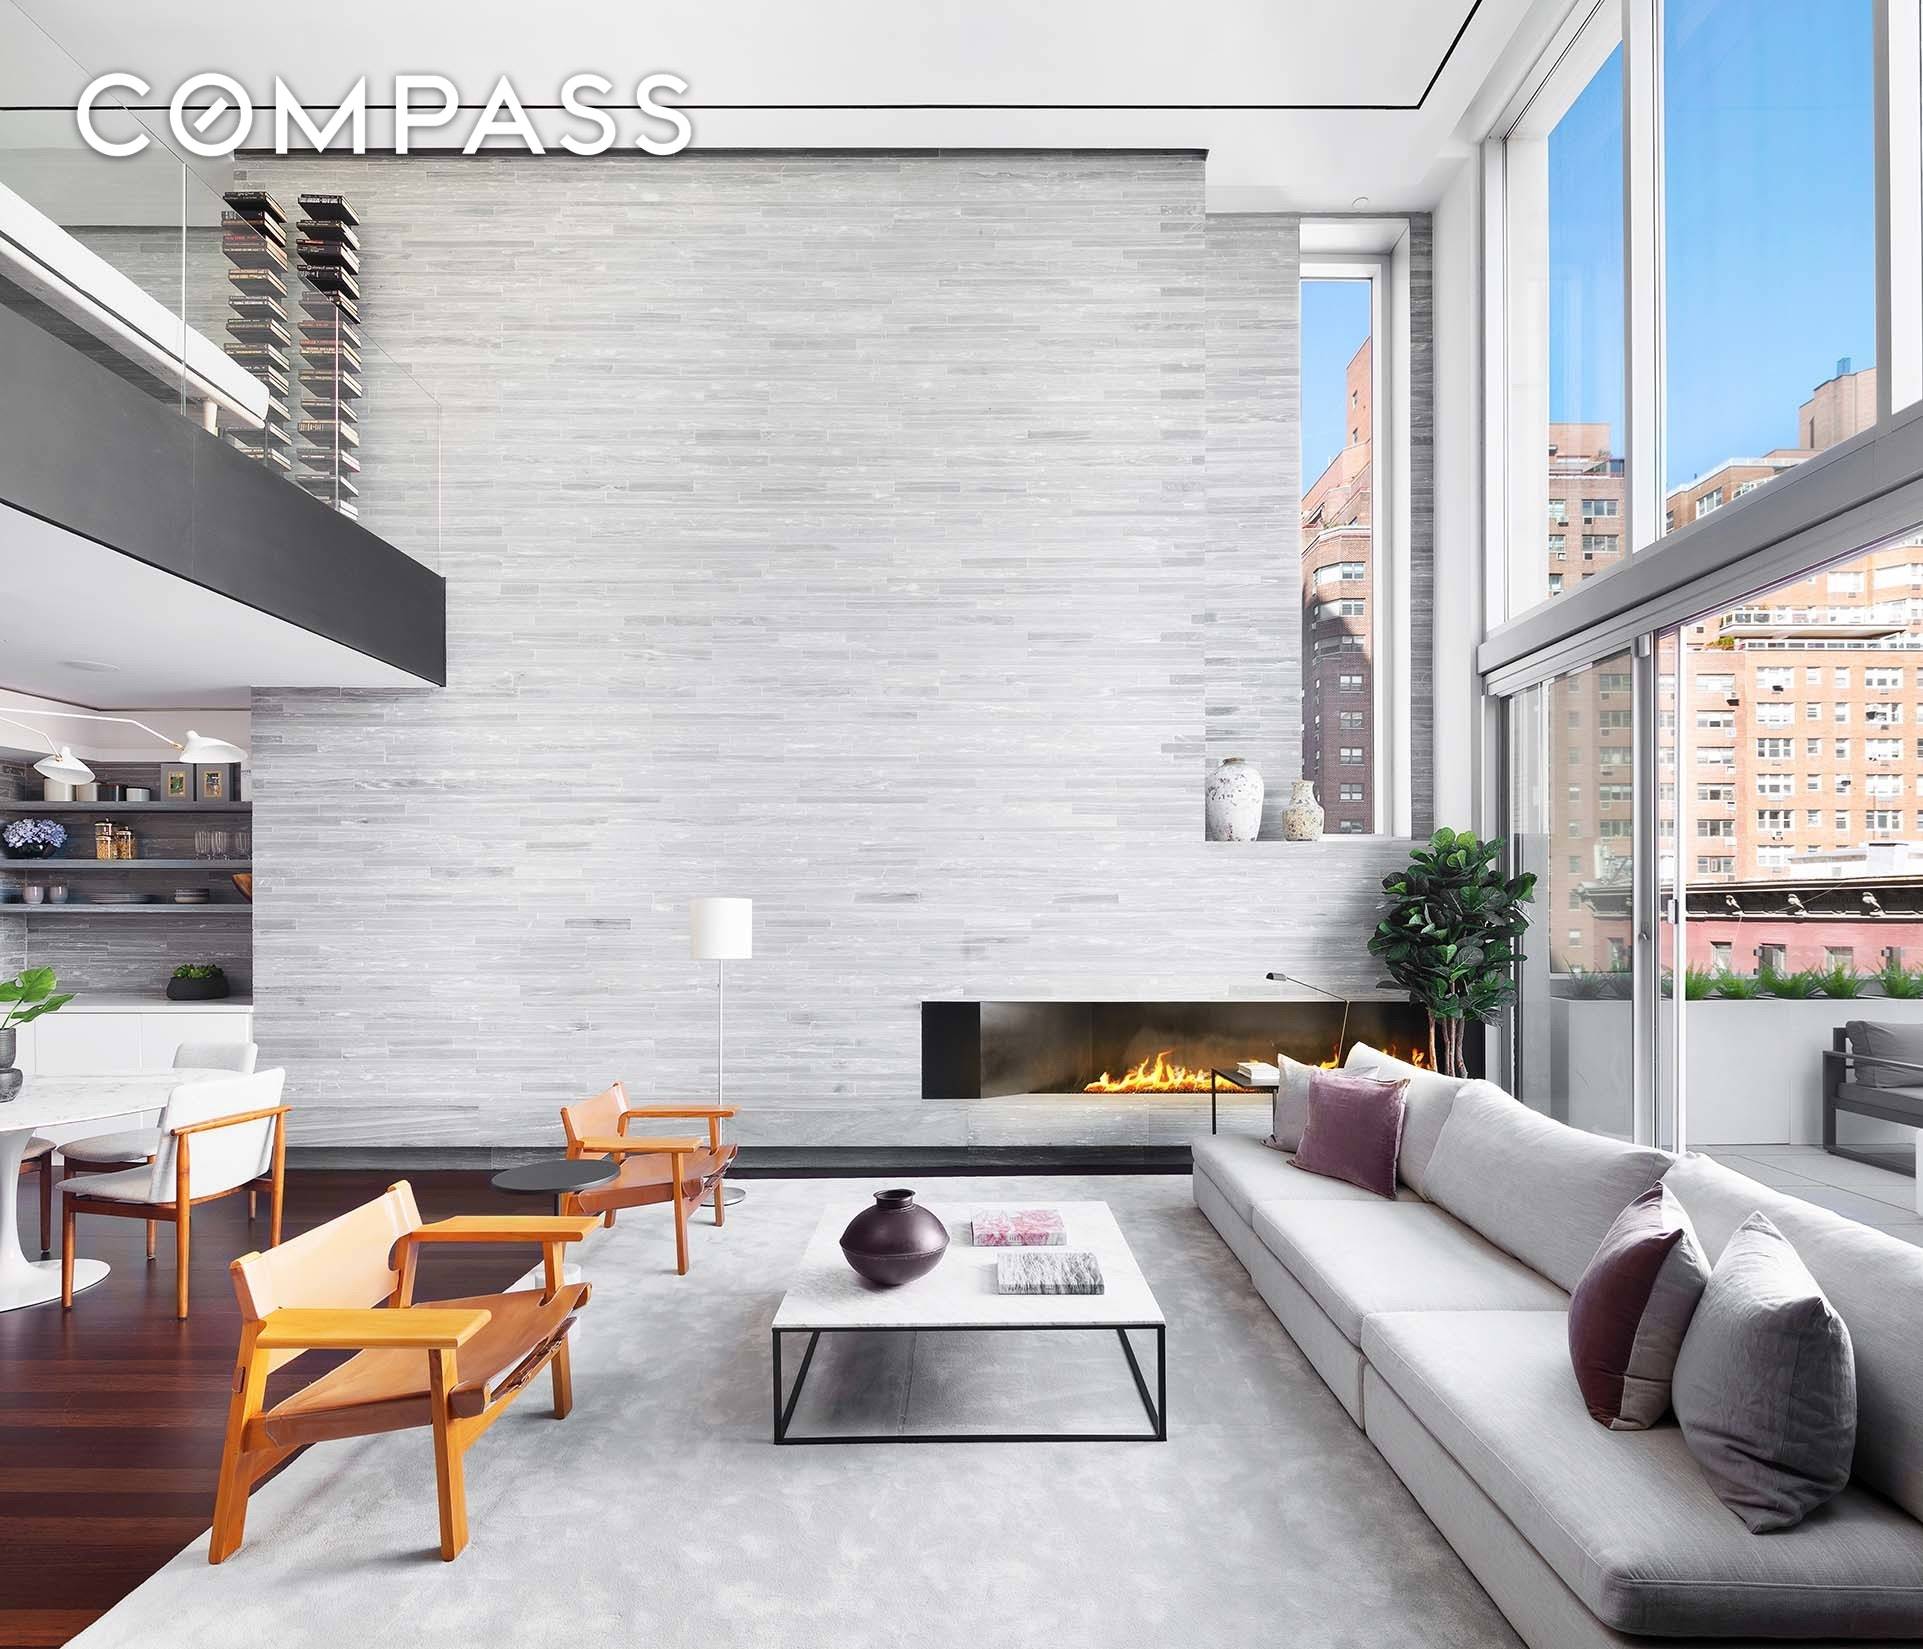 Rarely if ever does a penthouse loft of this style and caliber become available on the Upper East Side.